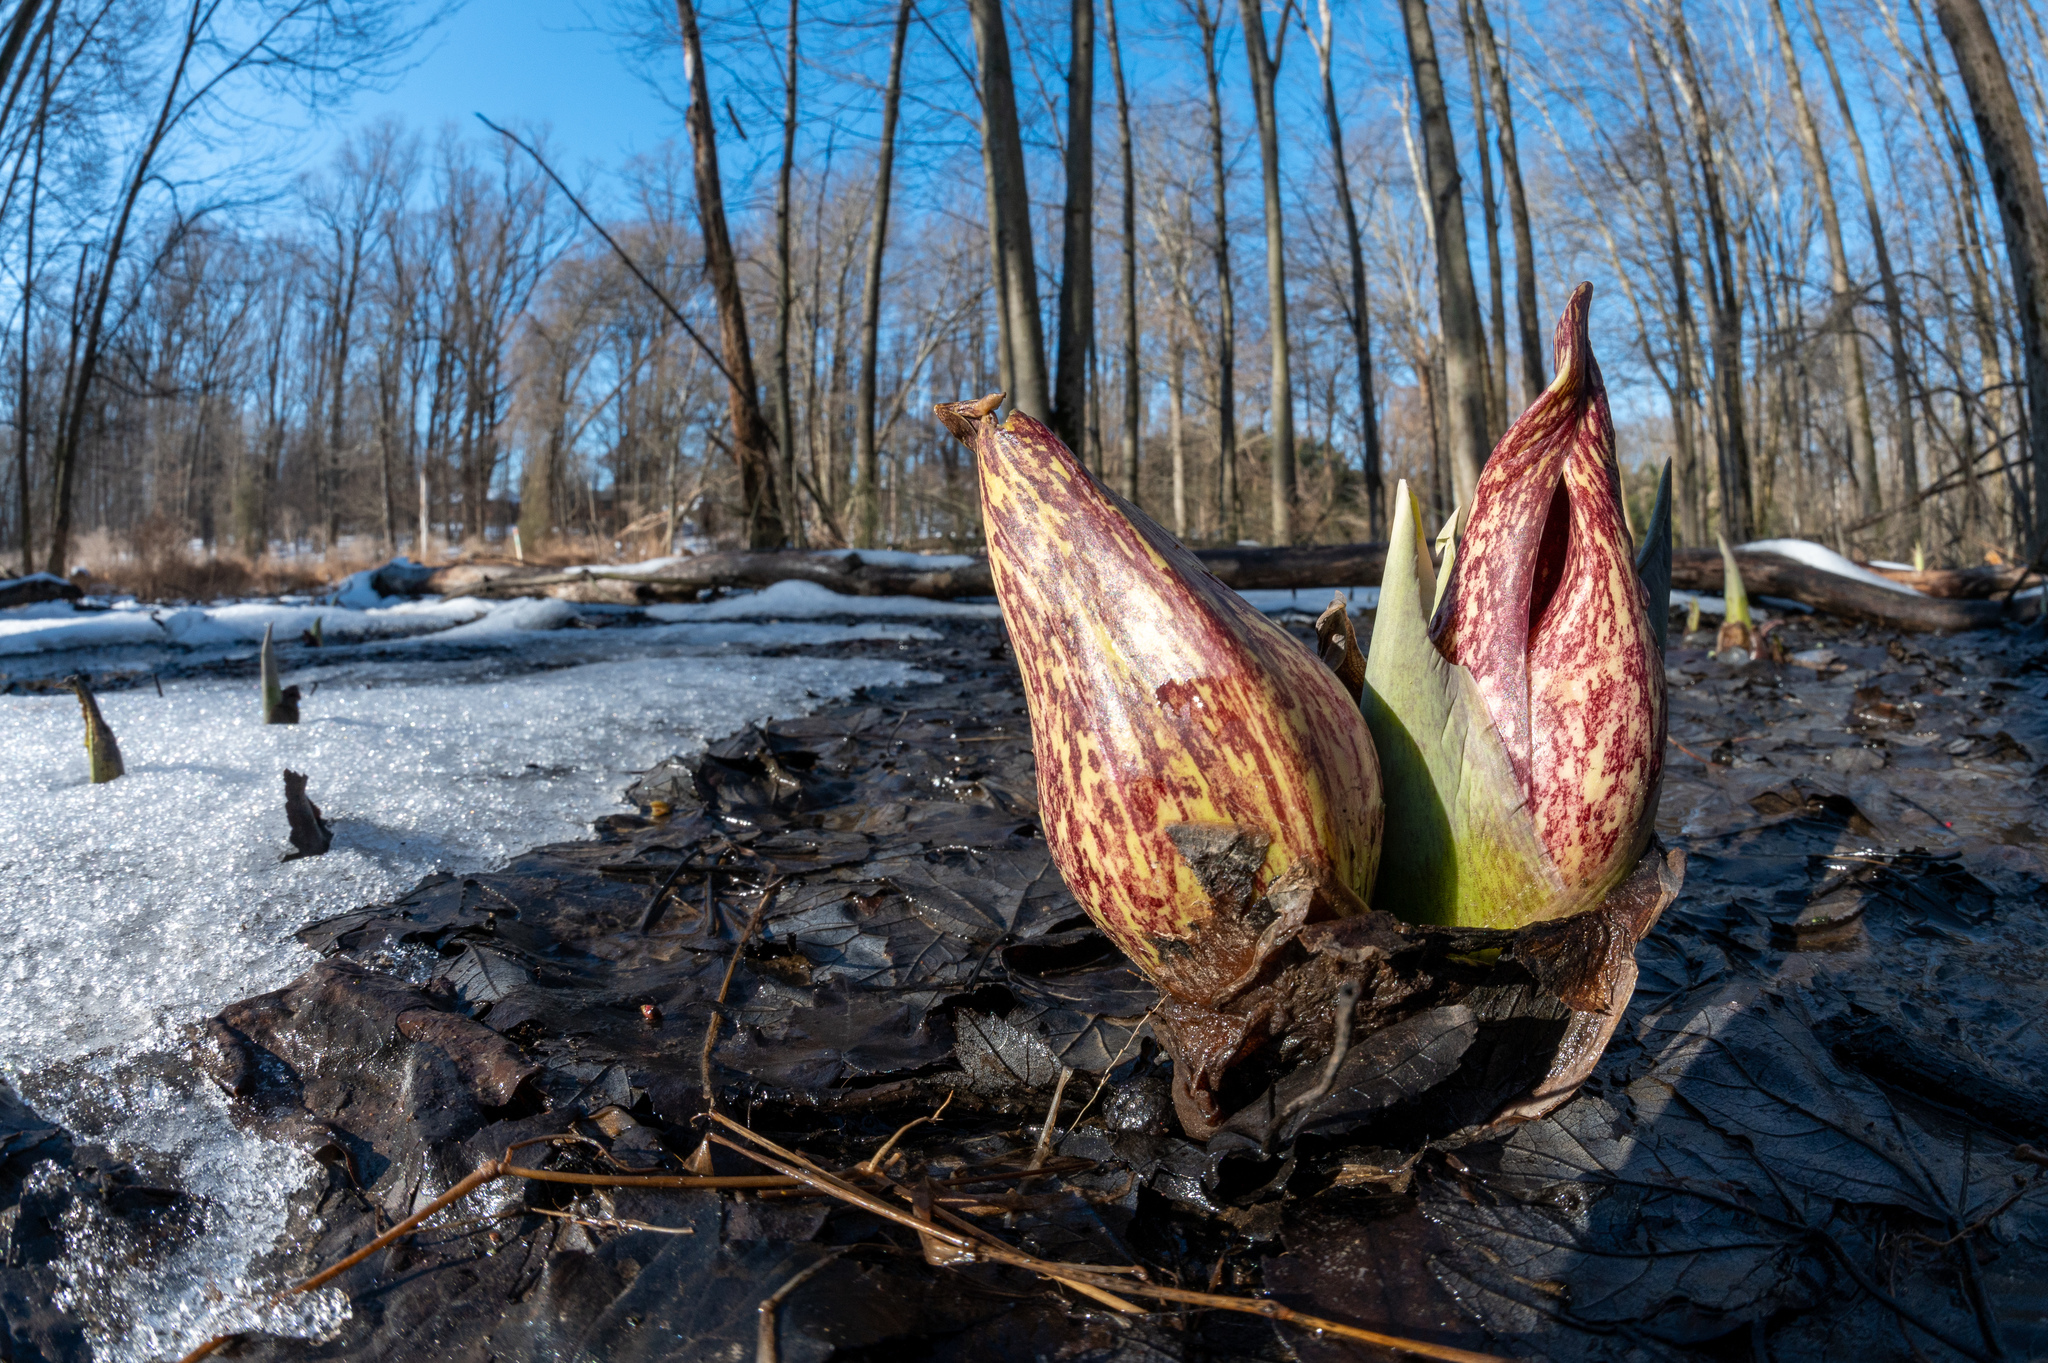 Skunk Cabbage emerging from the snow